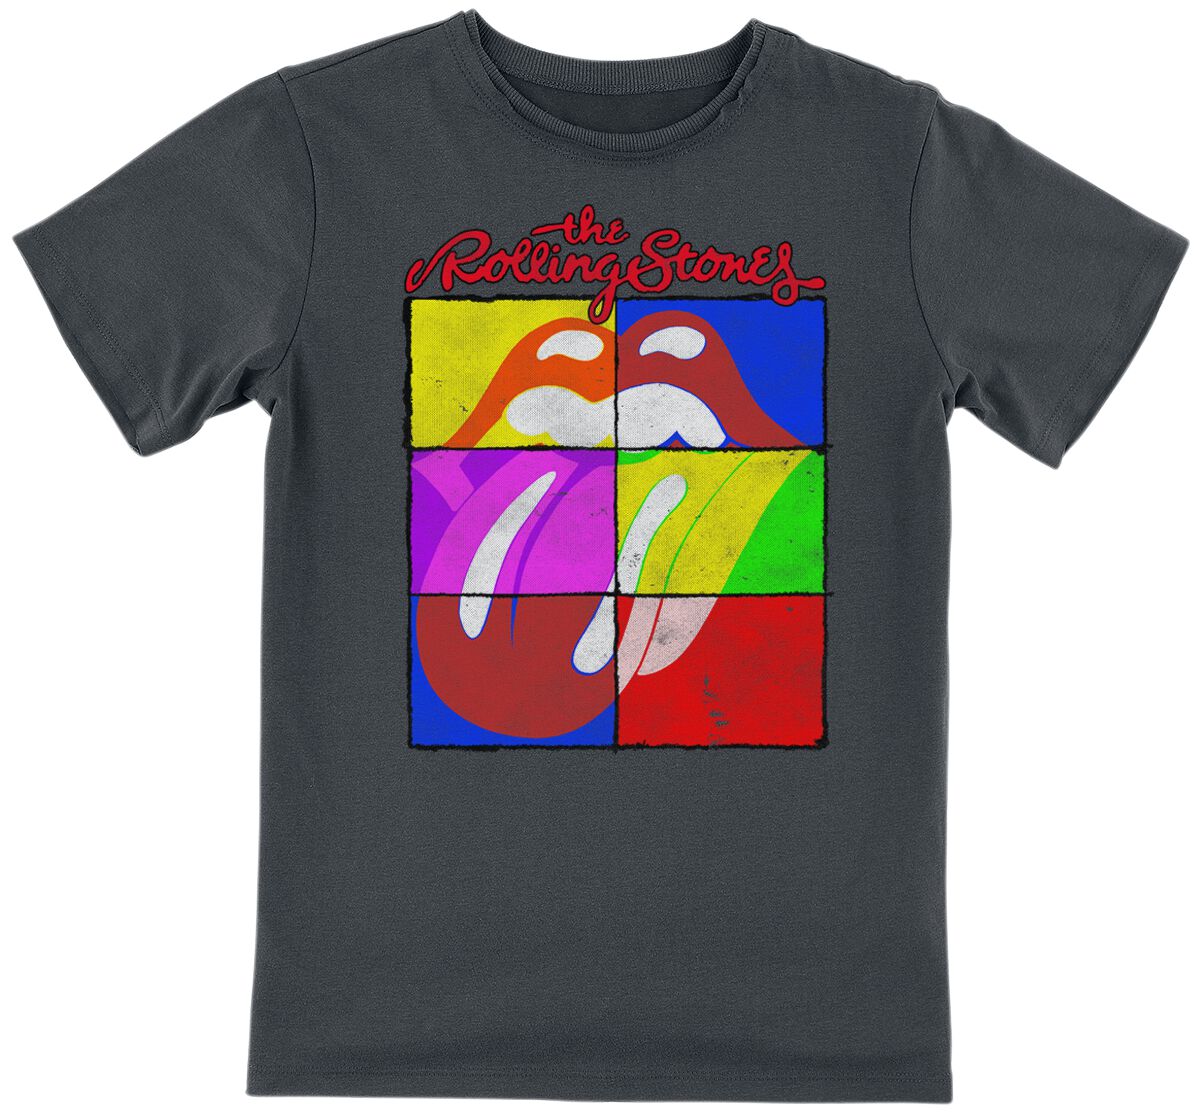 The Rolling Stones - Amplified Collection - Vintage Tongue - T-Shirt - charcoal